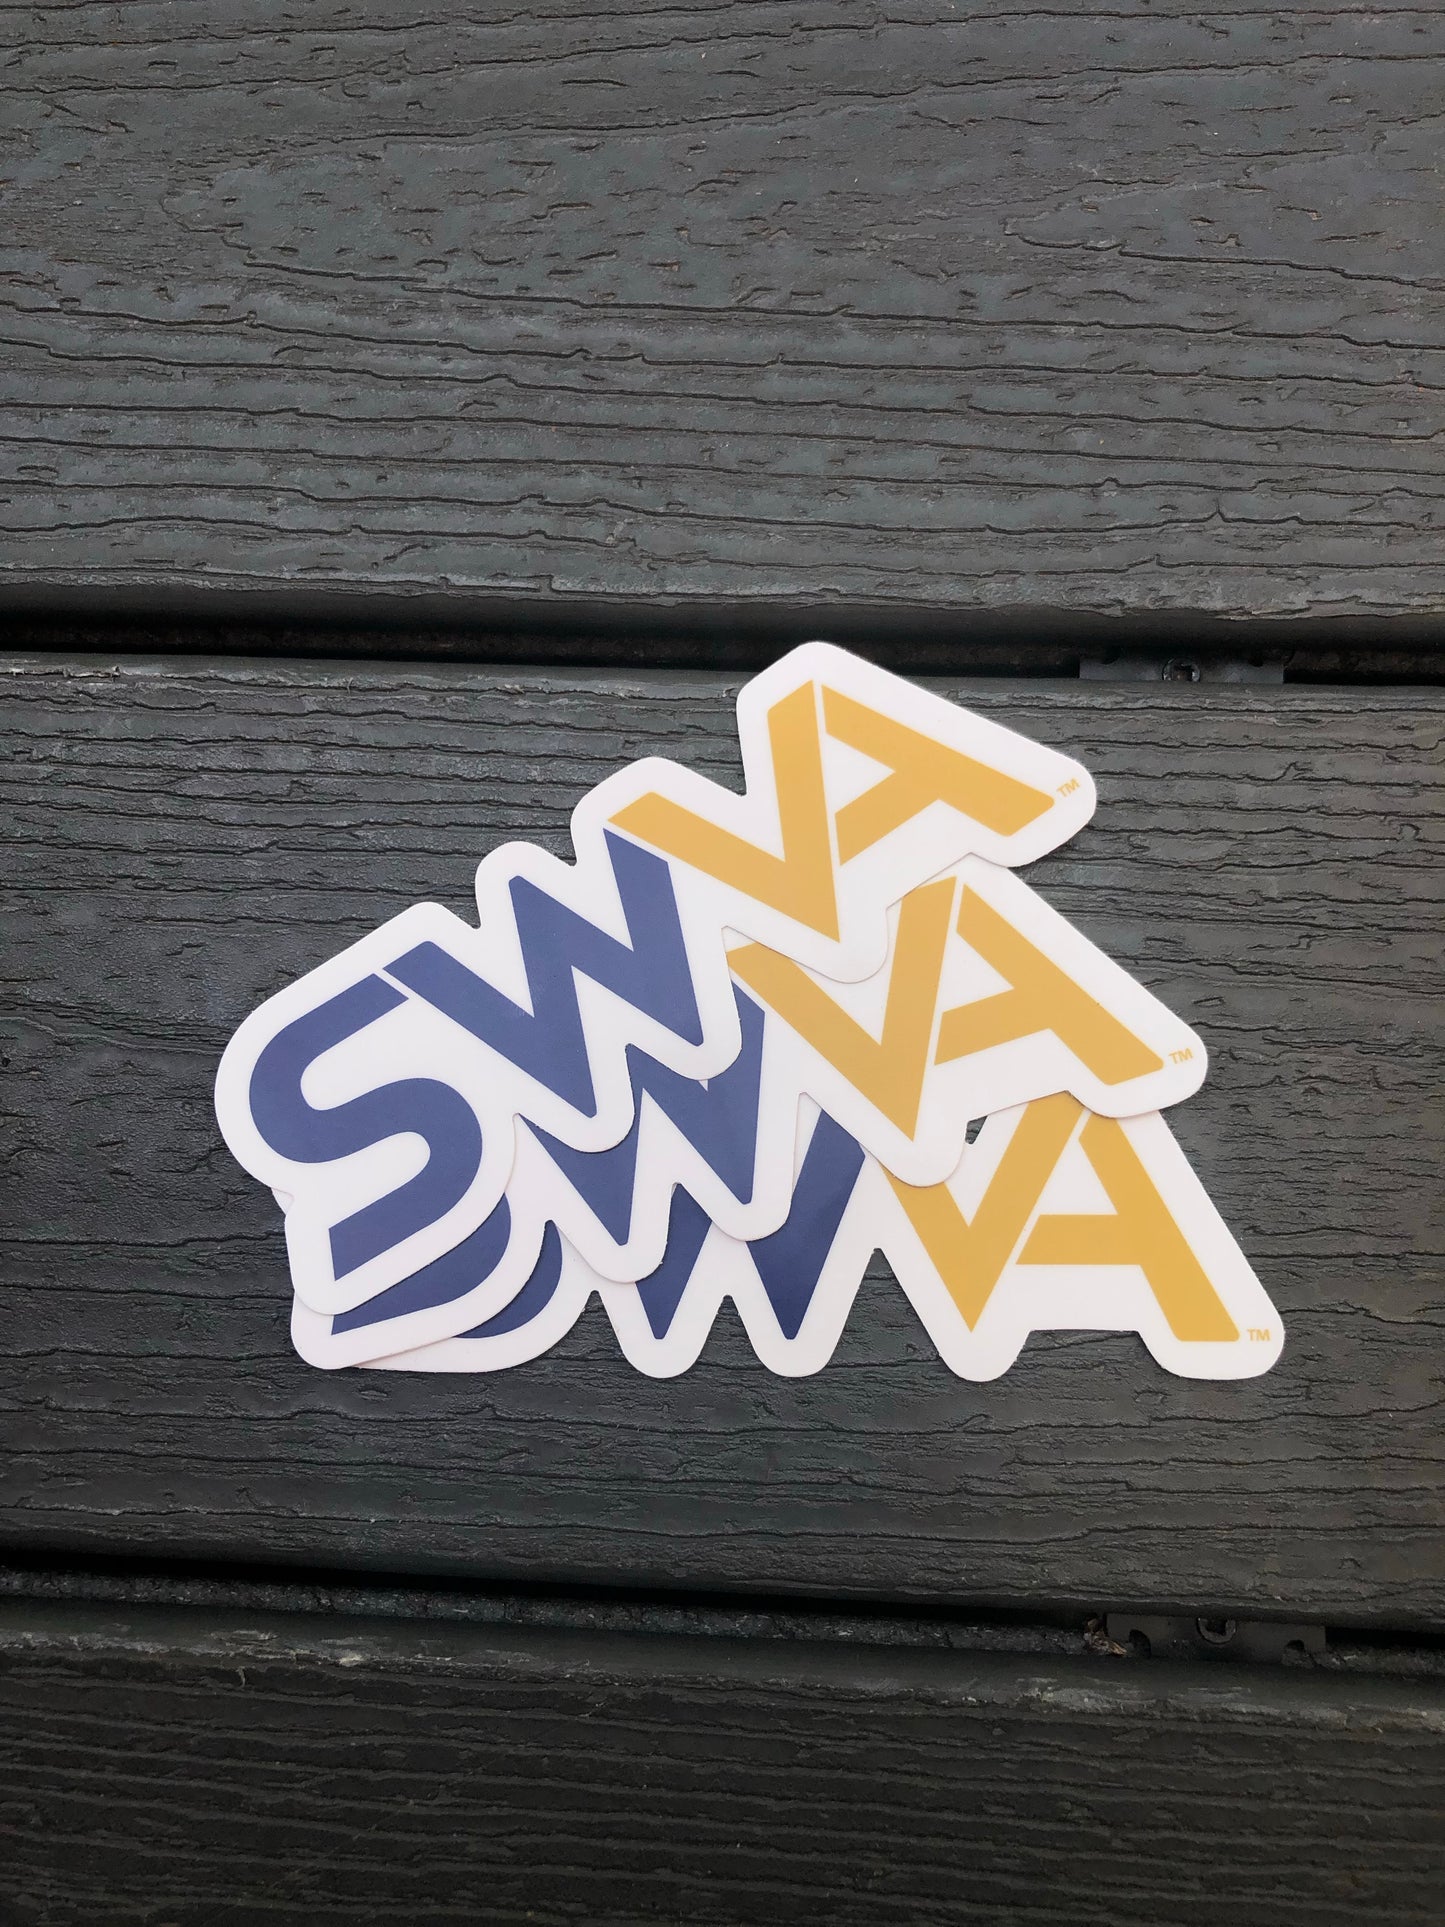 SWVA Letters Sticker (Blue/Gold) - Single or 3 Pack